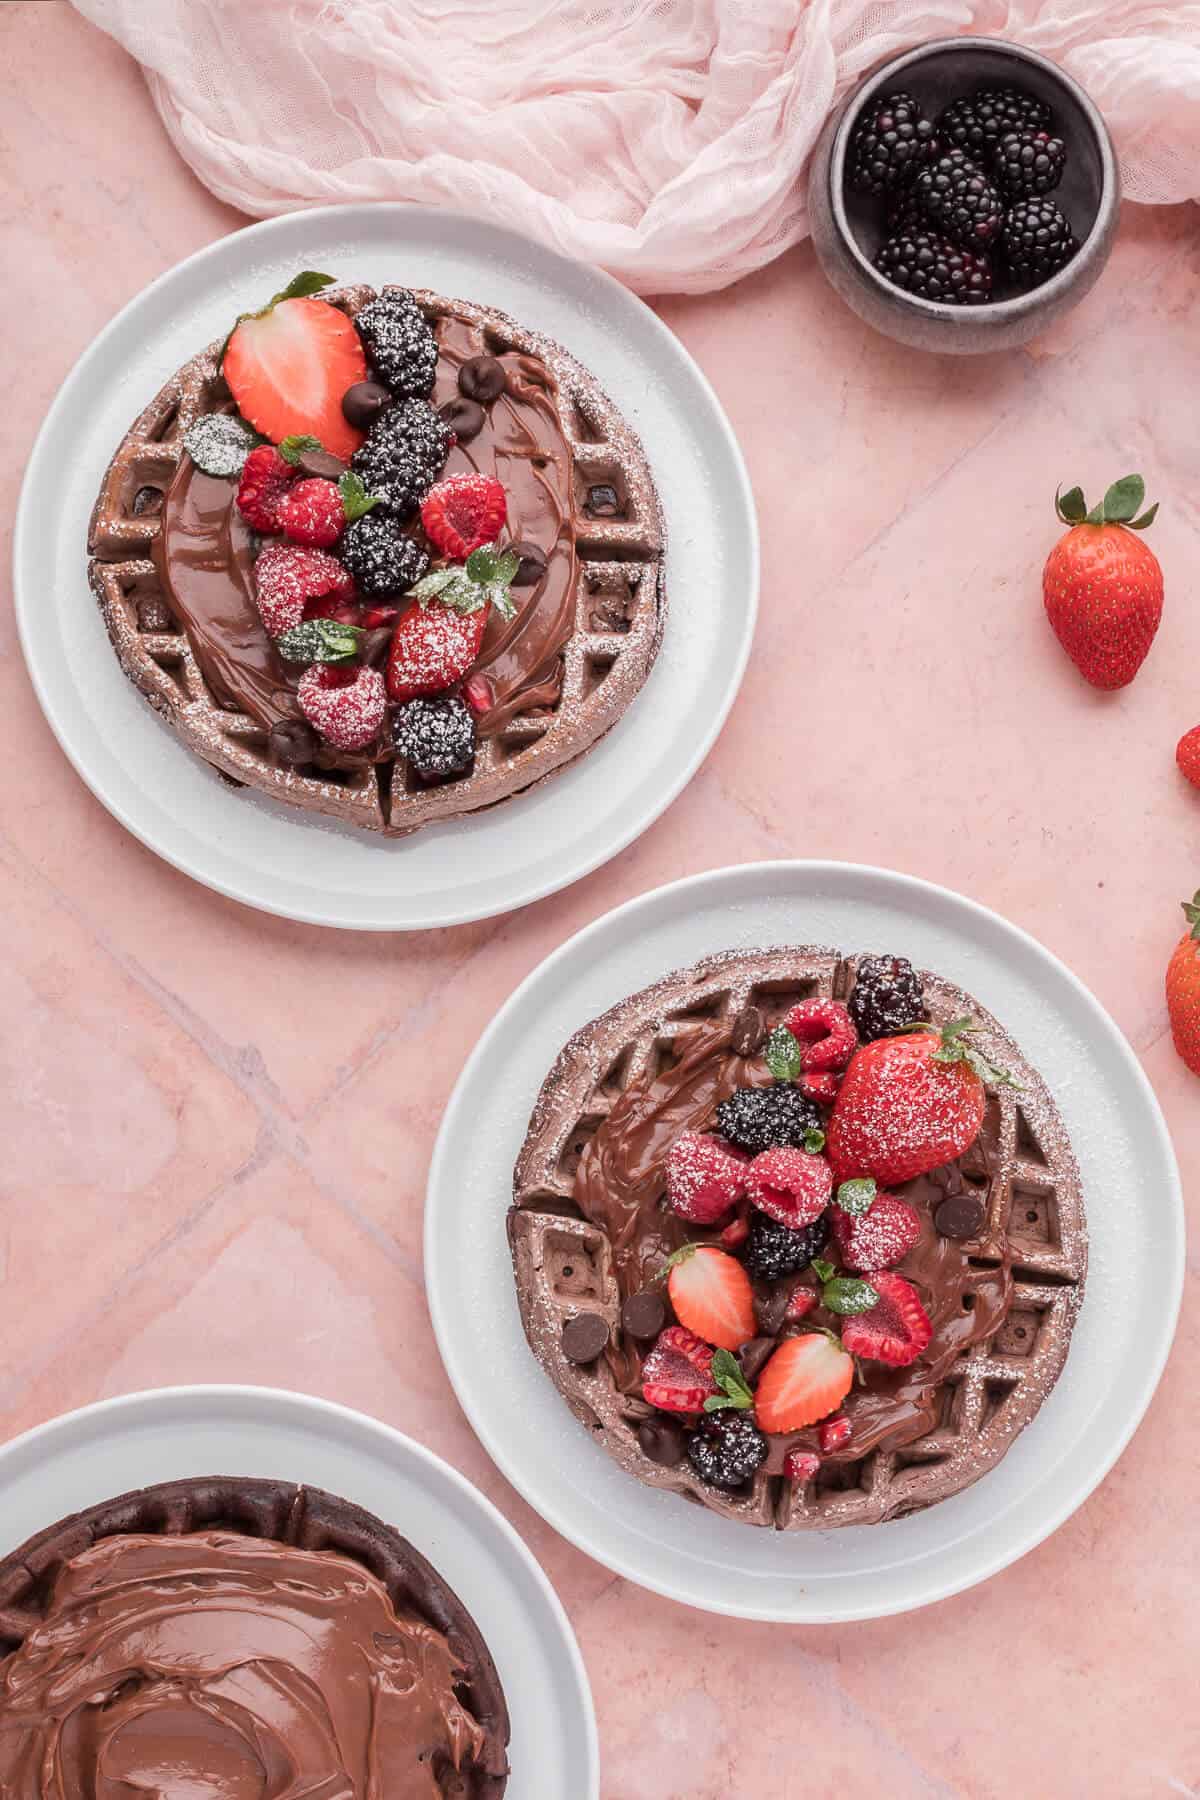 Chocolate waffles on a plate with chocolate sauce and berries.